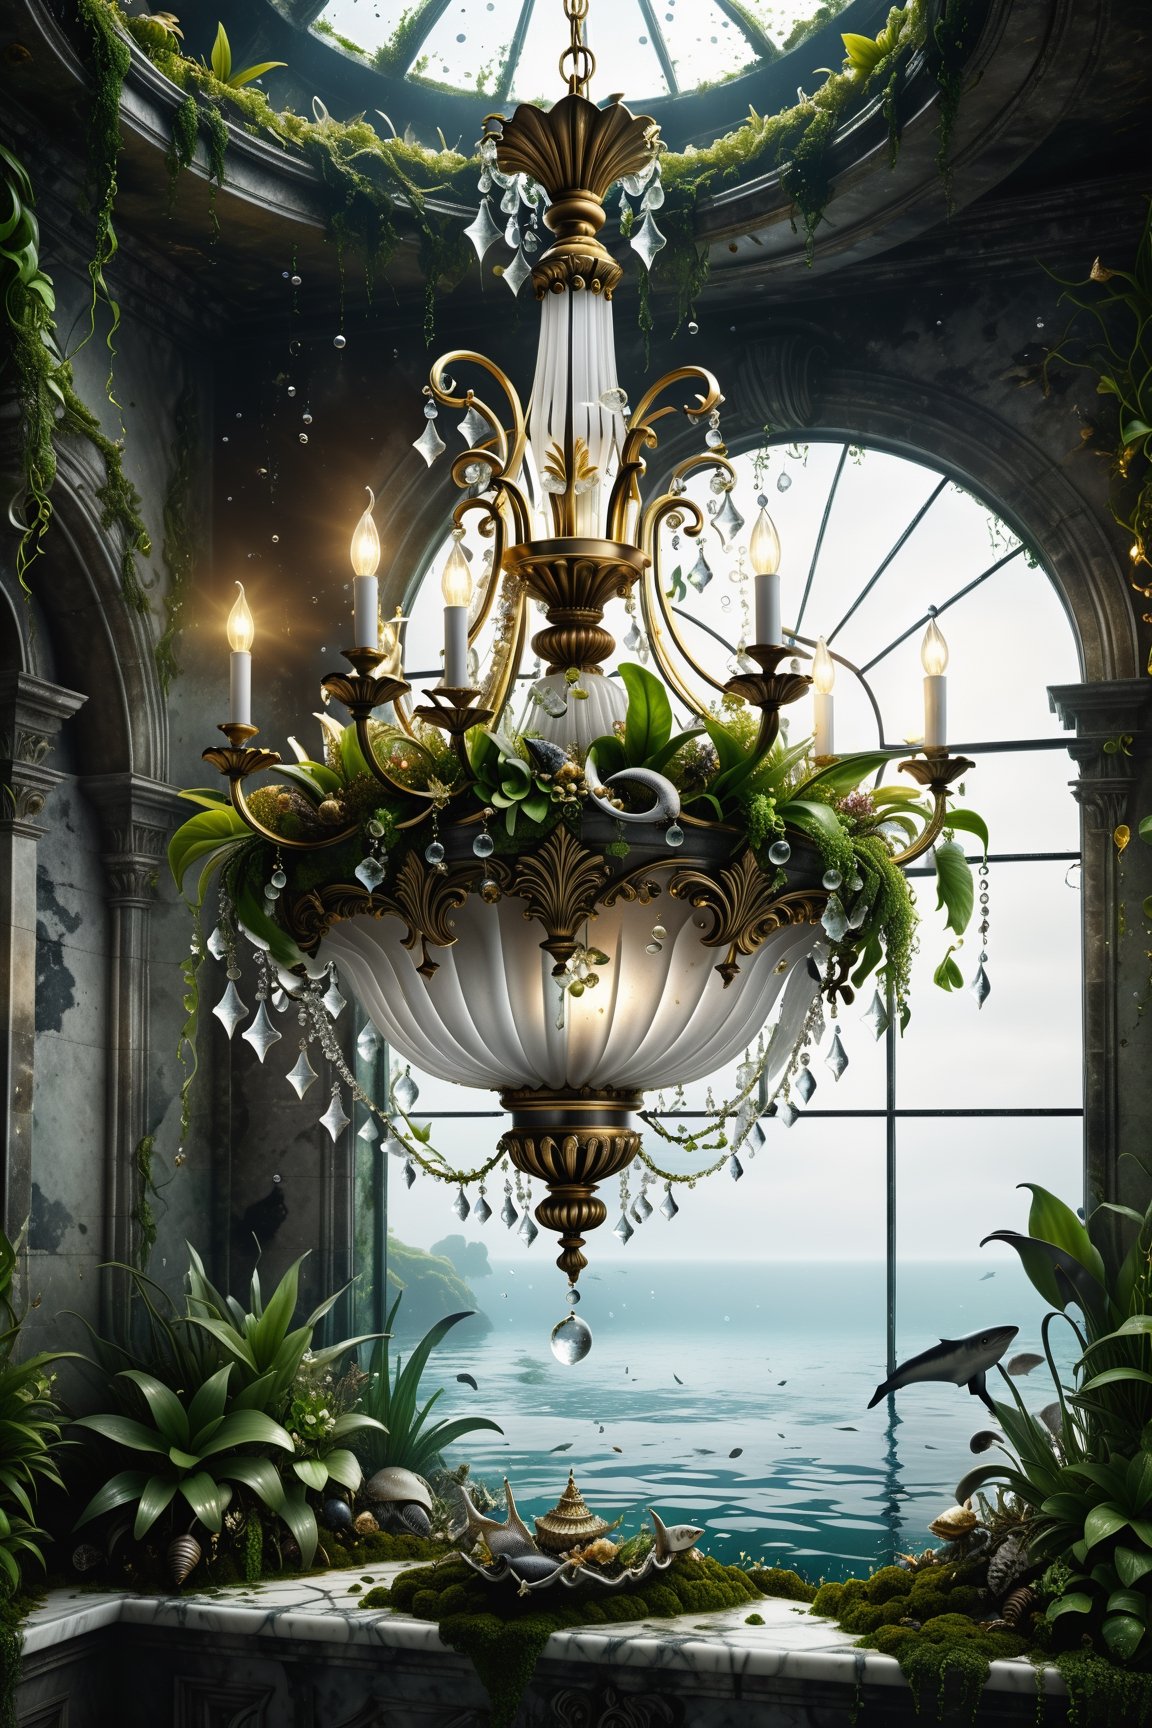 High definition photorealistic render of an incredible and mysterious luxurious abandoned chandelier with wing, with vining plants and moss, made in white marble with black and gold details in classic abandoned ornament and located on the seabed, with fish sharks marine life, aquatic plants, sea beds, shells and explosion of bubbles